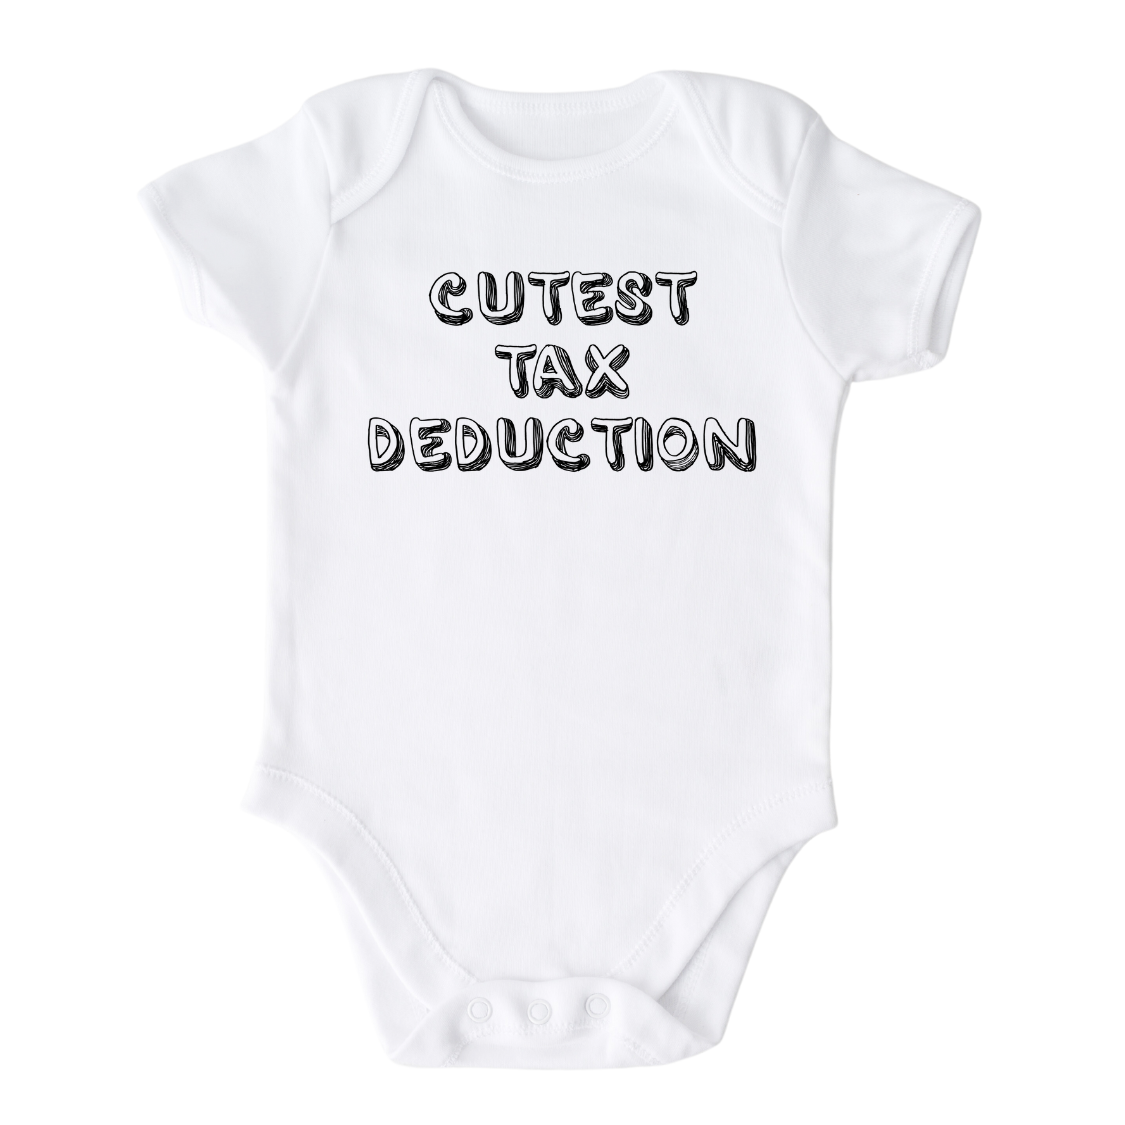 Cutest Tax Deduction Baby Onesie® Cute Bodysuit for Baby Shower Gift for Newborn Clothes CPA Tax Season